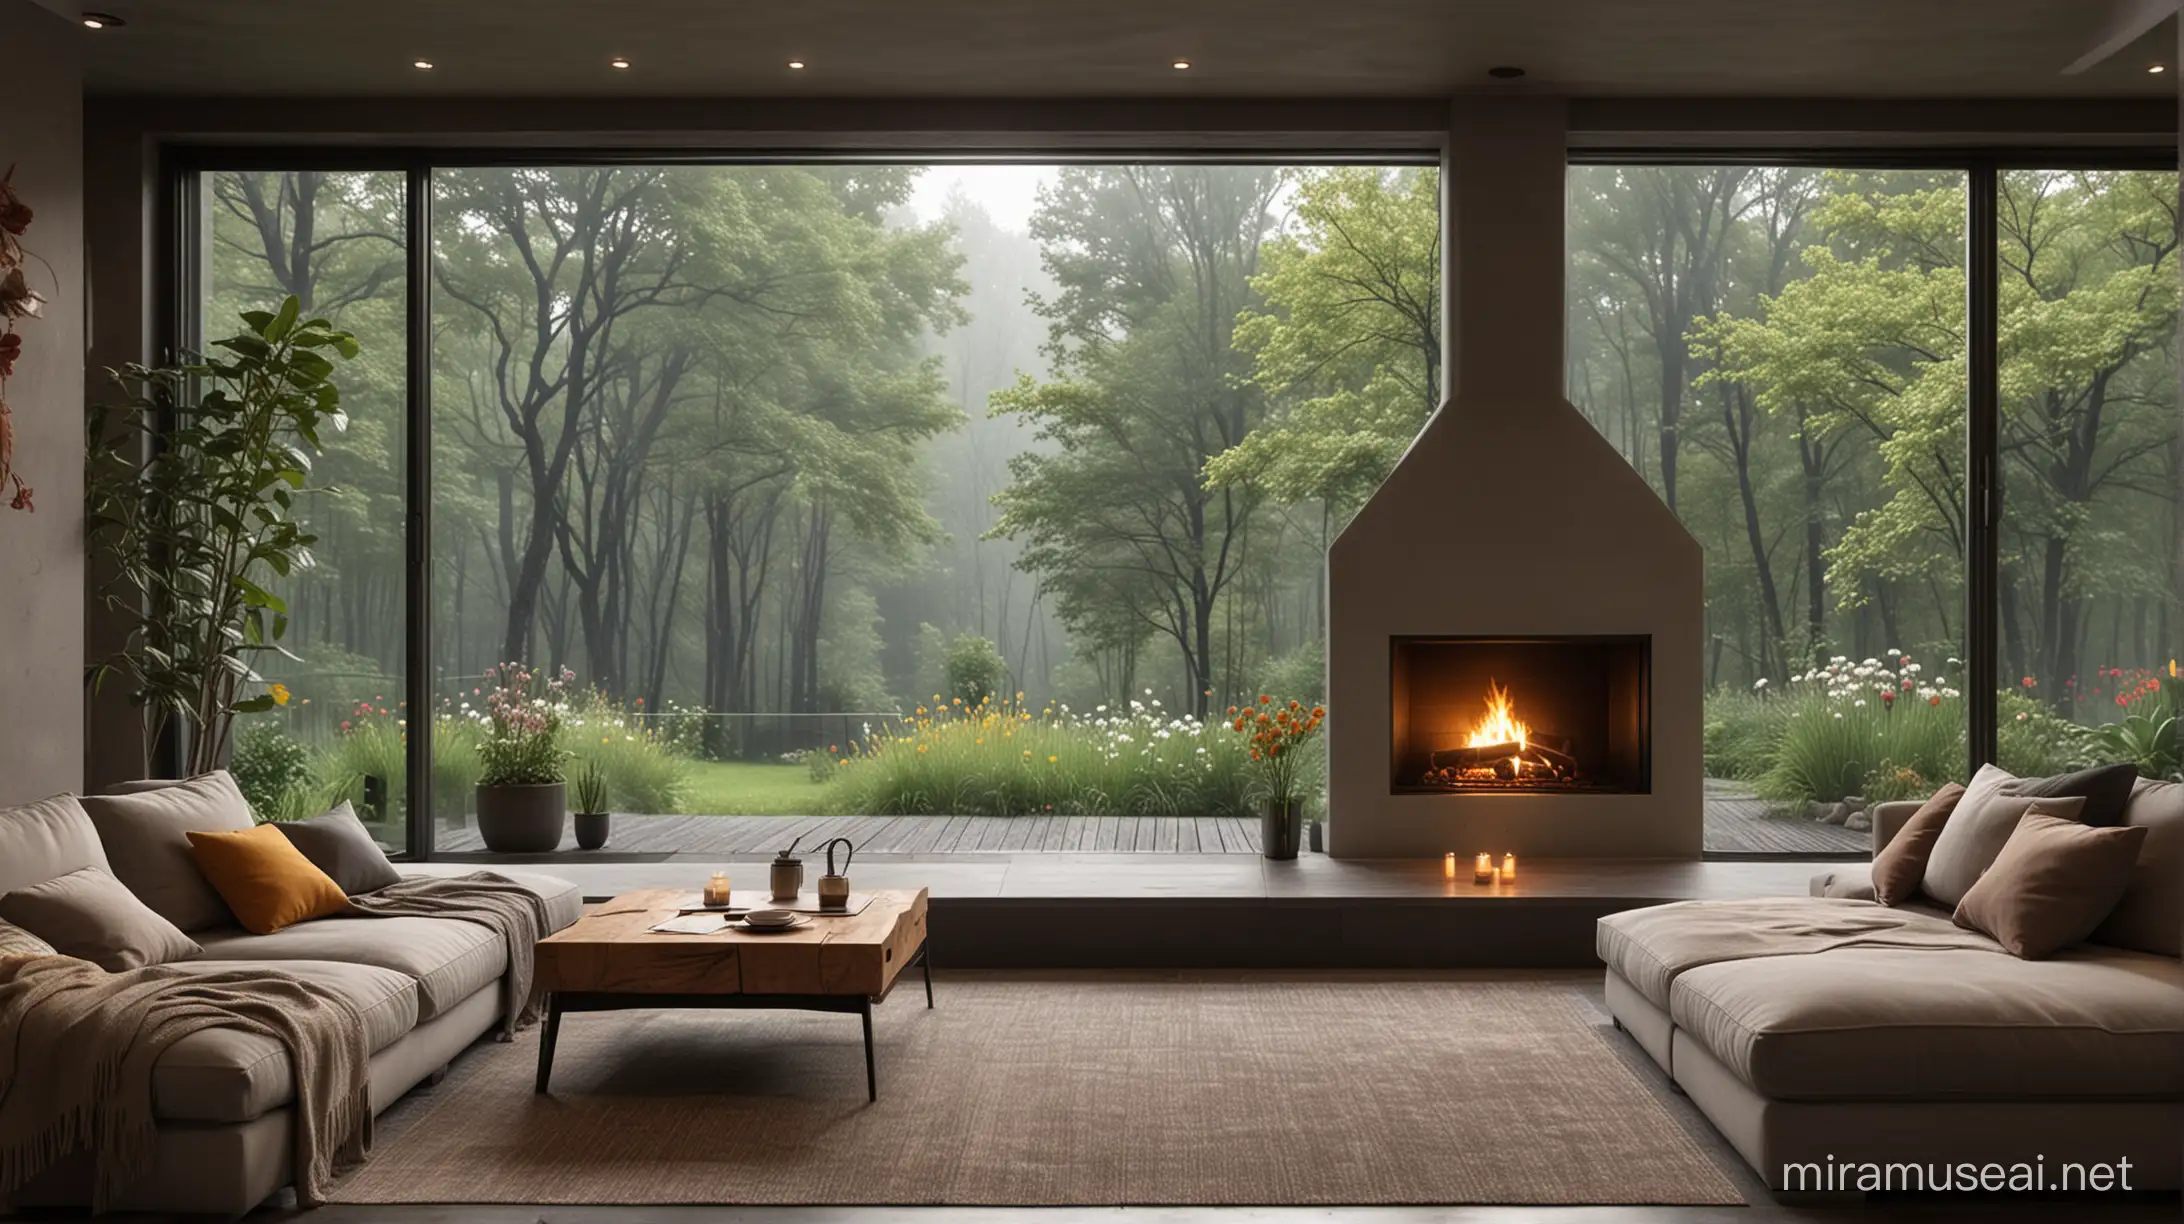 Fireplace style, It's a view of a room with , a terrace. It has a nice fireplace and is decorated with a cozy sofa. All the doors to the terrace are opened. The view outside the window is a dark at night with beautiful trees and flowers, rain, forest.